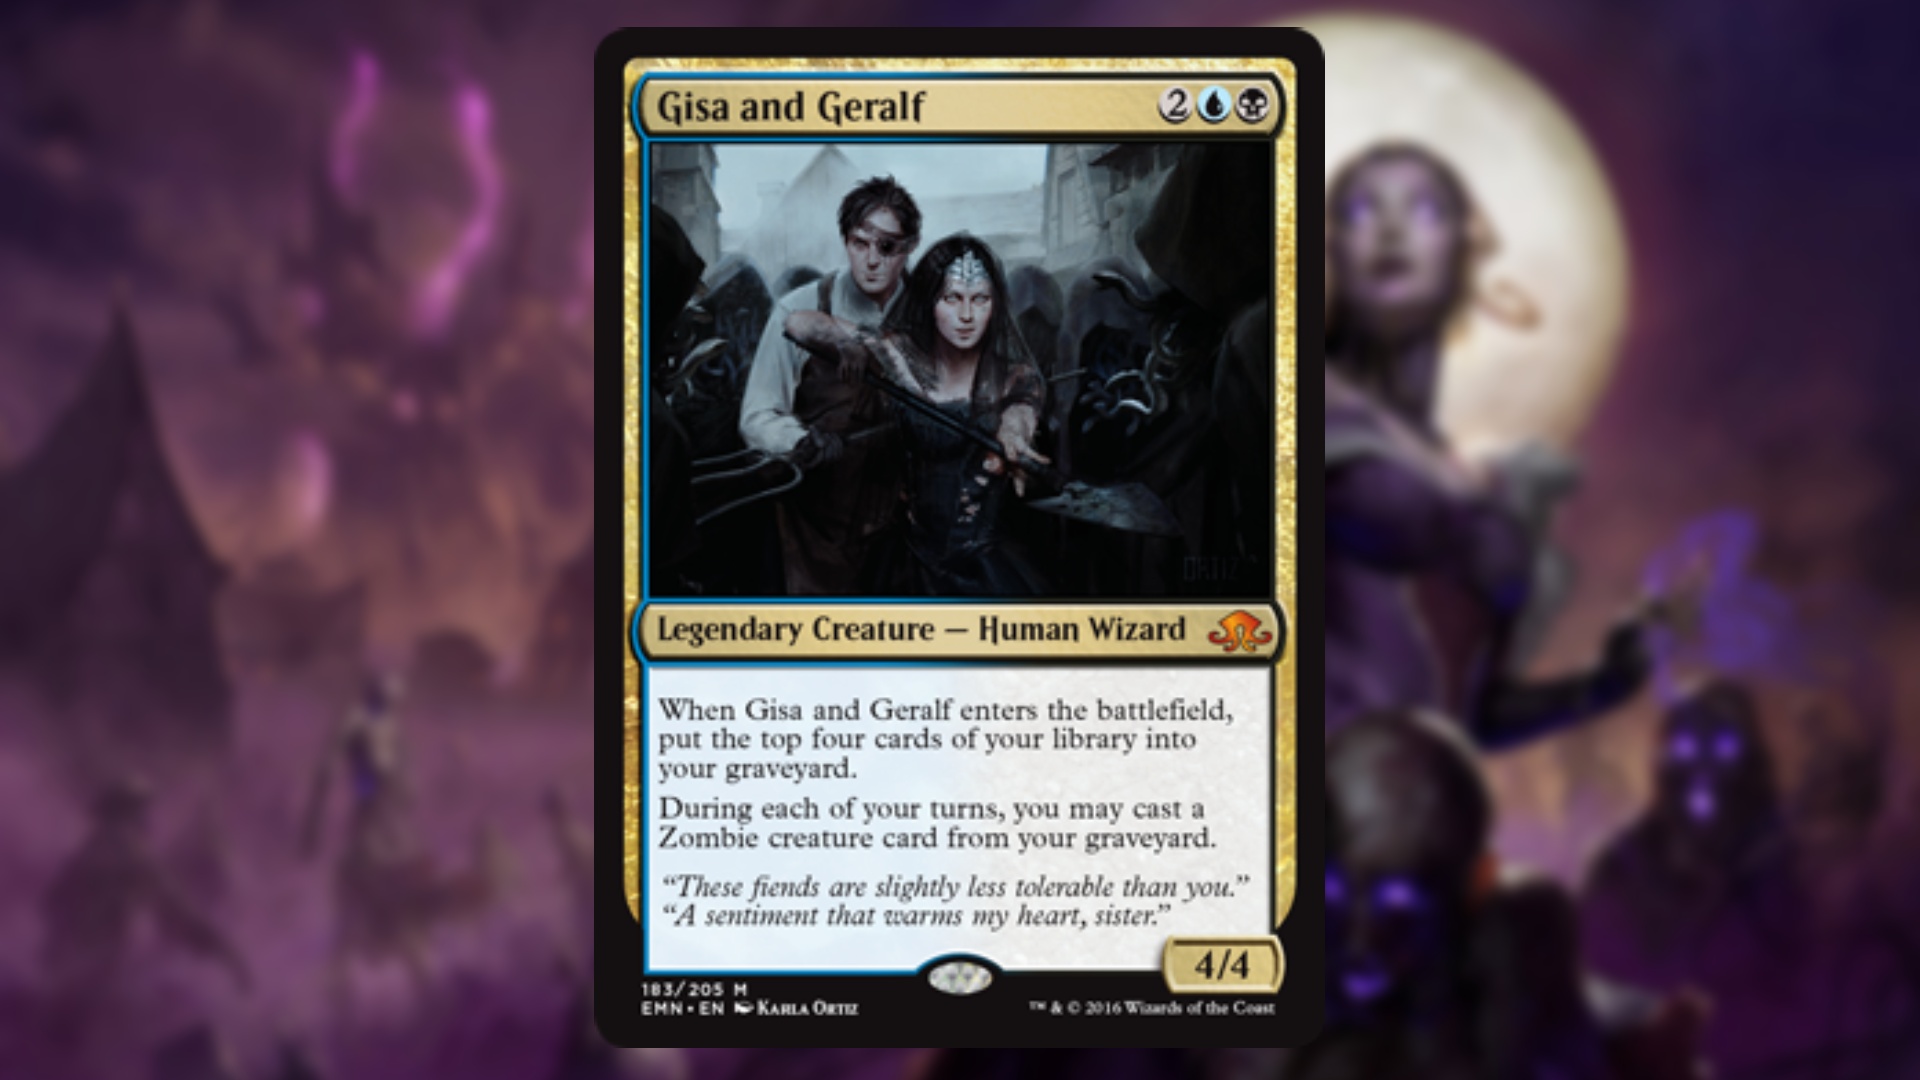 magic the gathering card with a gold border featuring a pale man and woman with gothic looking clothes standing in a misty city surrounded by undead hooded figures